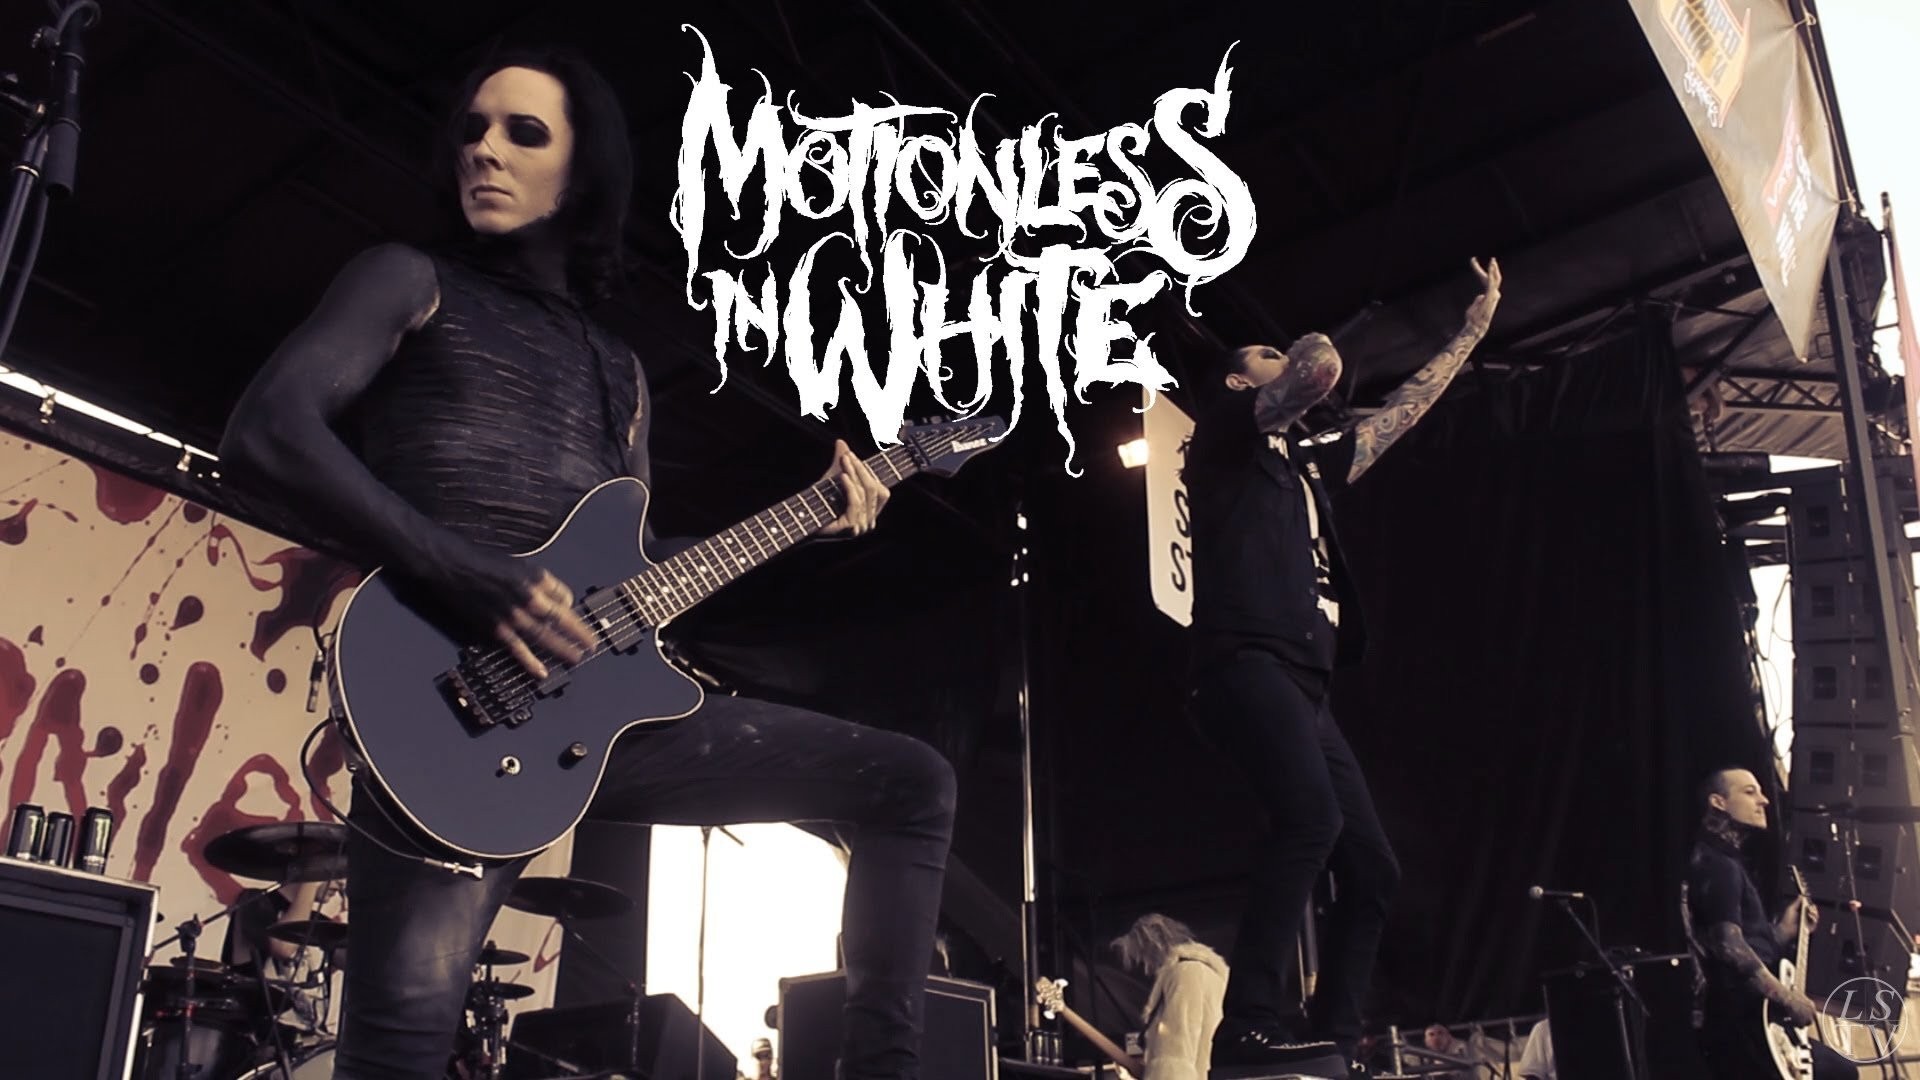 Motionless In White Metalcore Alternative Metal Concerts Band Rock Music 1920x1080